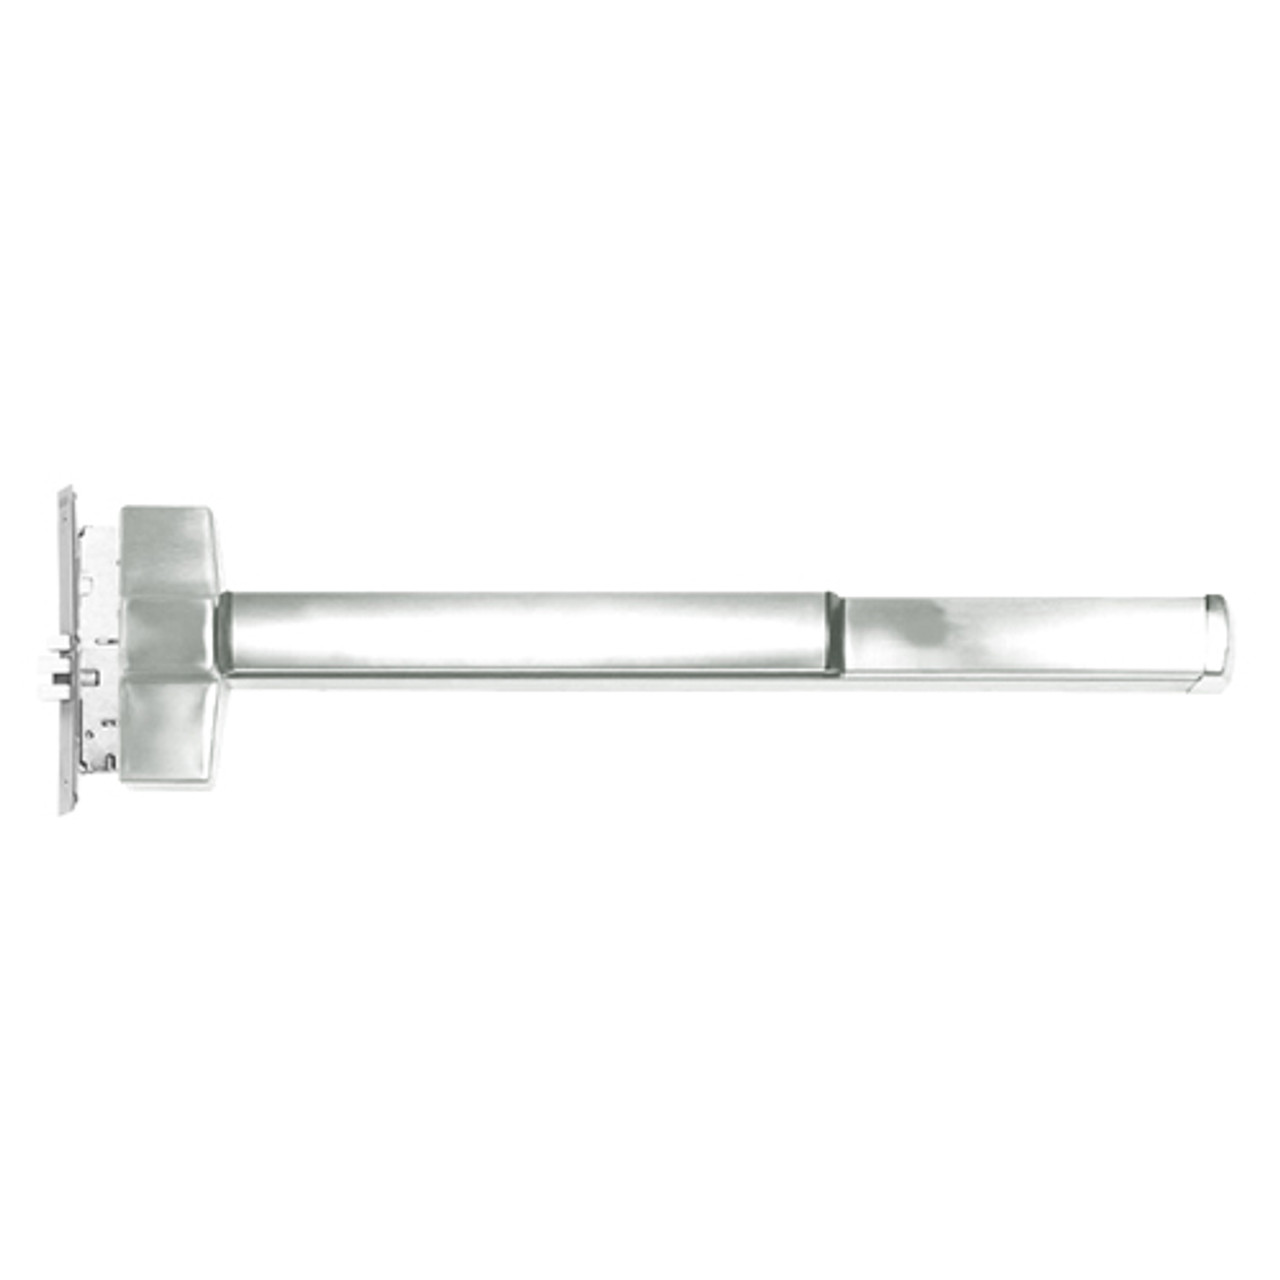 ED5657ATD-618-RHR Corbin ED5600 Series Fire Rated Mortise Exit Device with Delayed Egress in Bright Nickel Finish